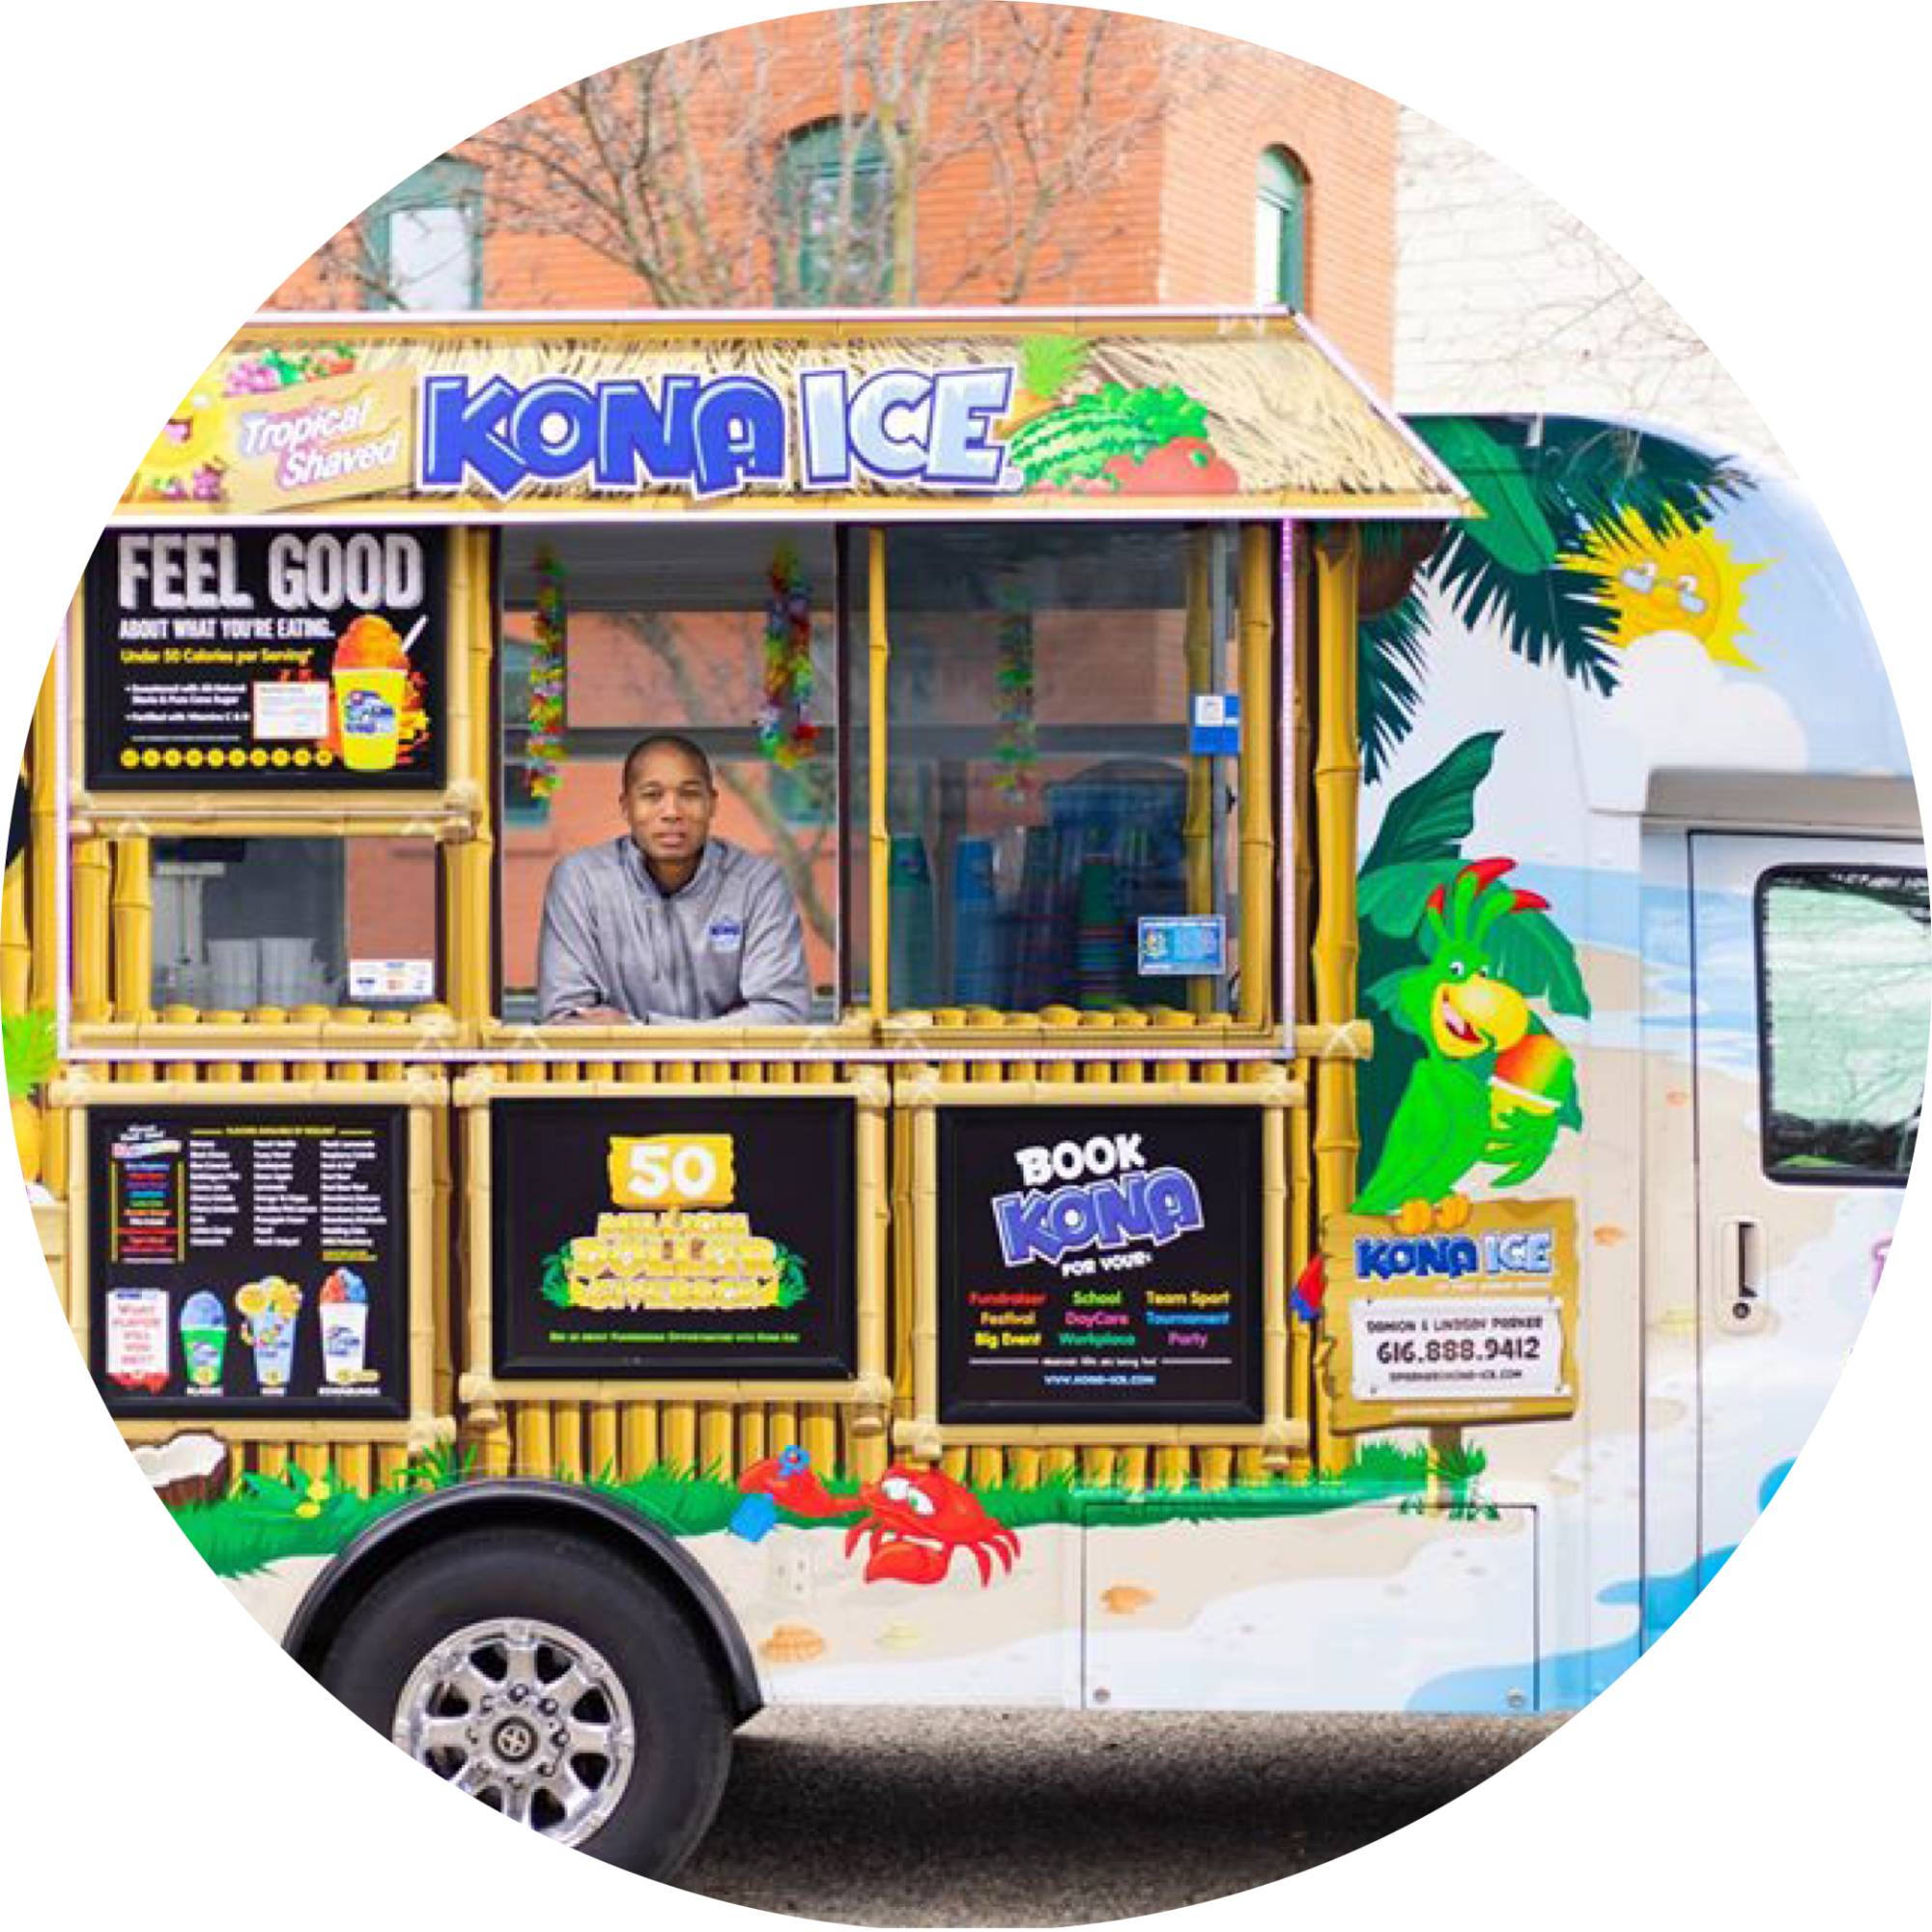 Kona Ice of West Michigan truck, Damion Parker smiling in the window